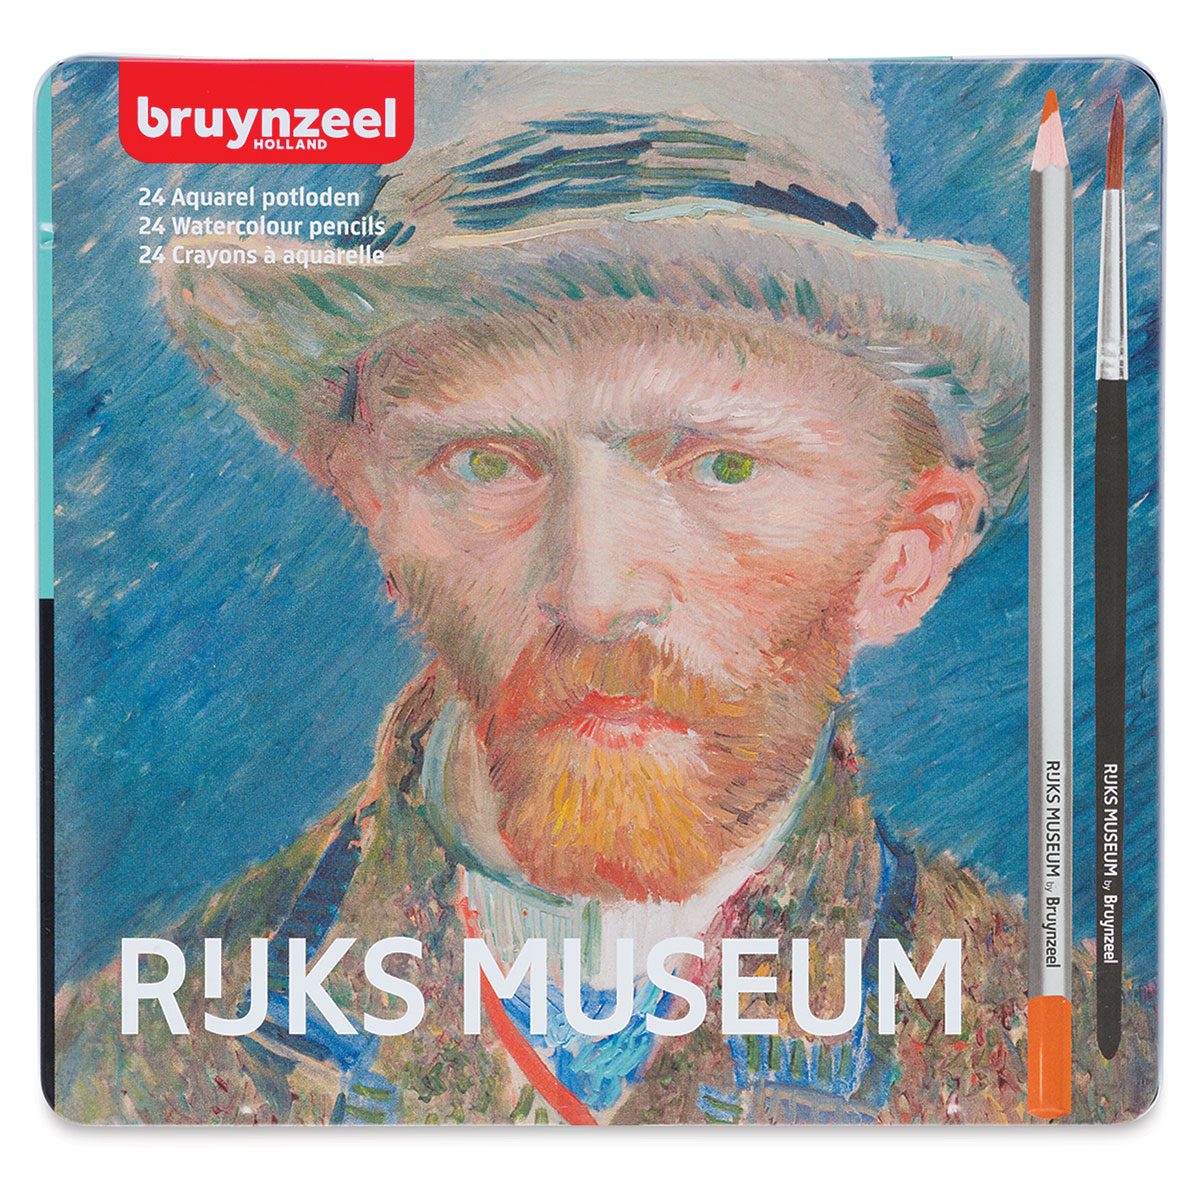 Bruynzeel Design Colored Pencils and Sets